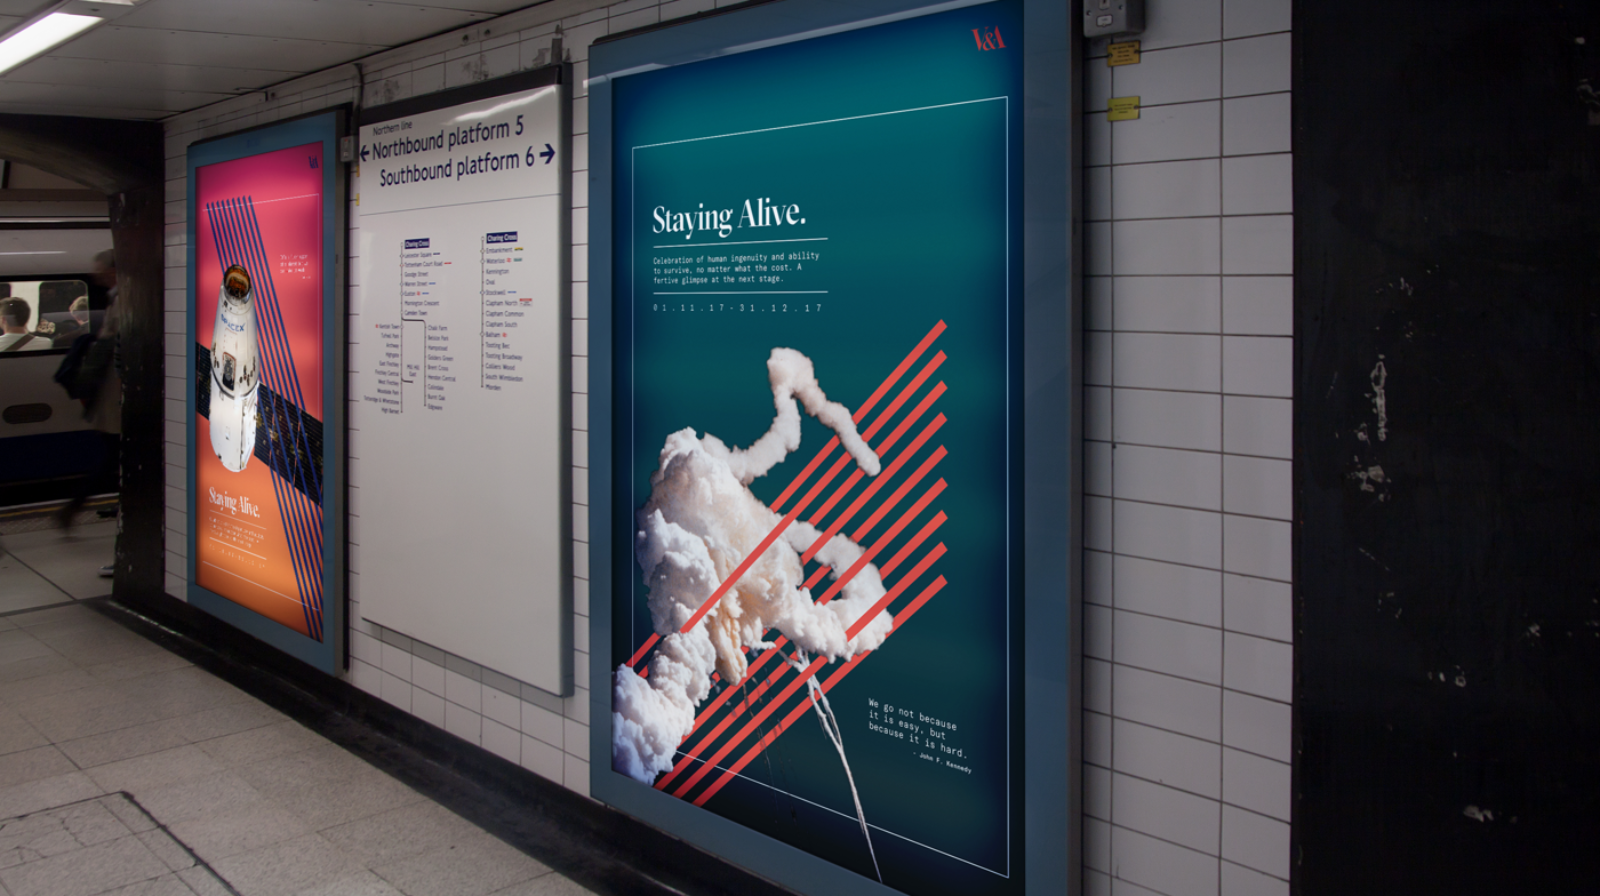 Static tube posters - 2 side by side.